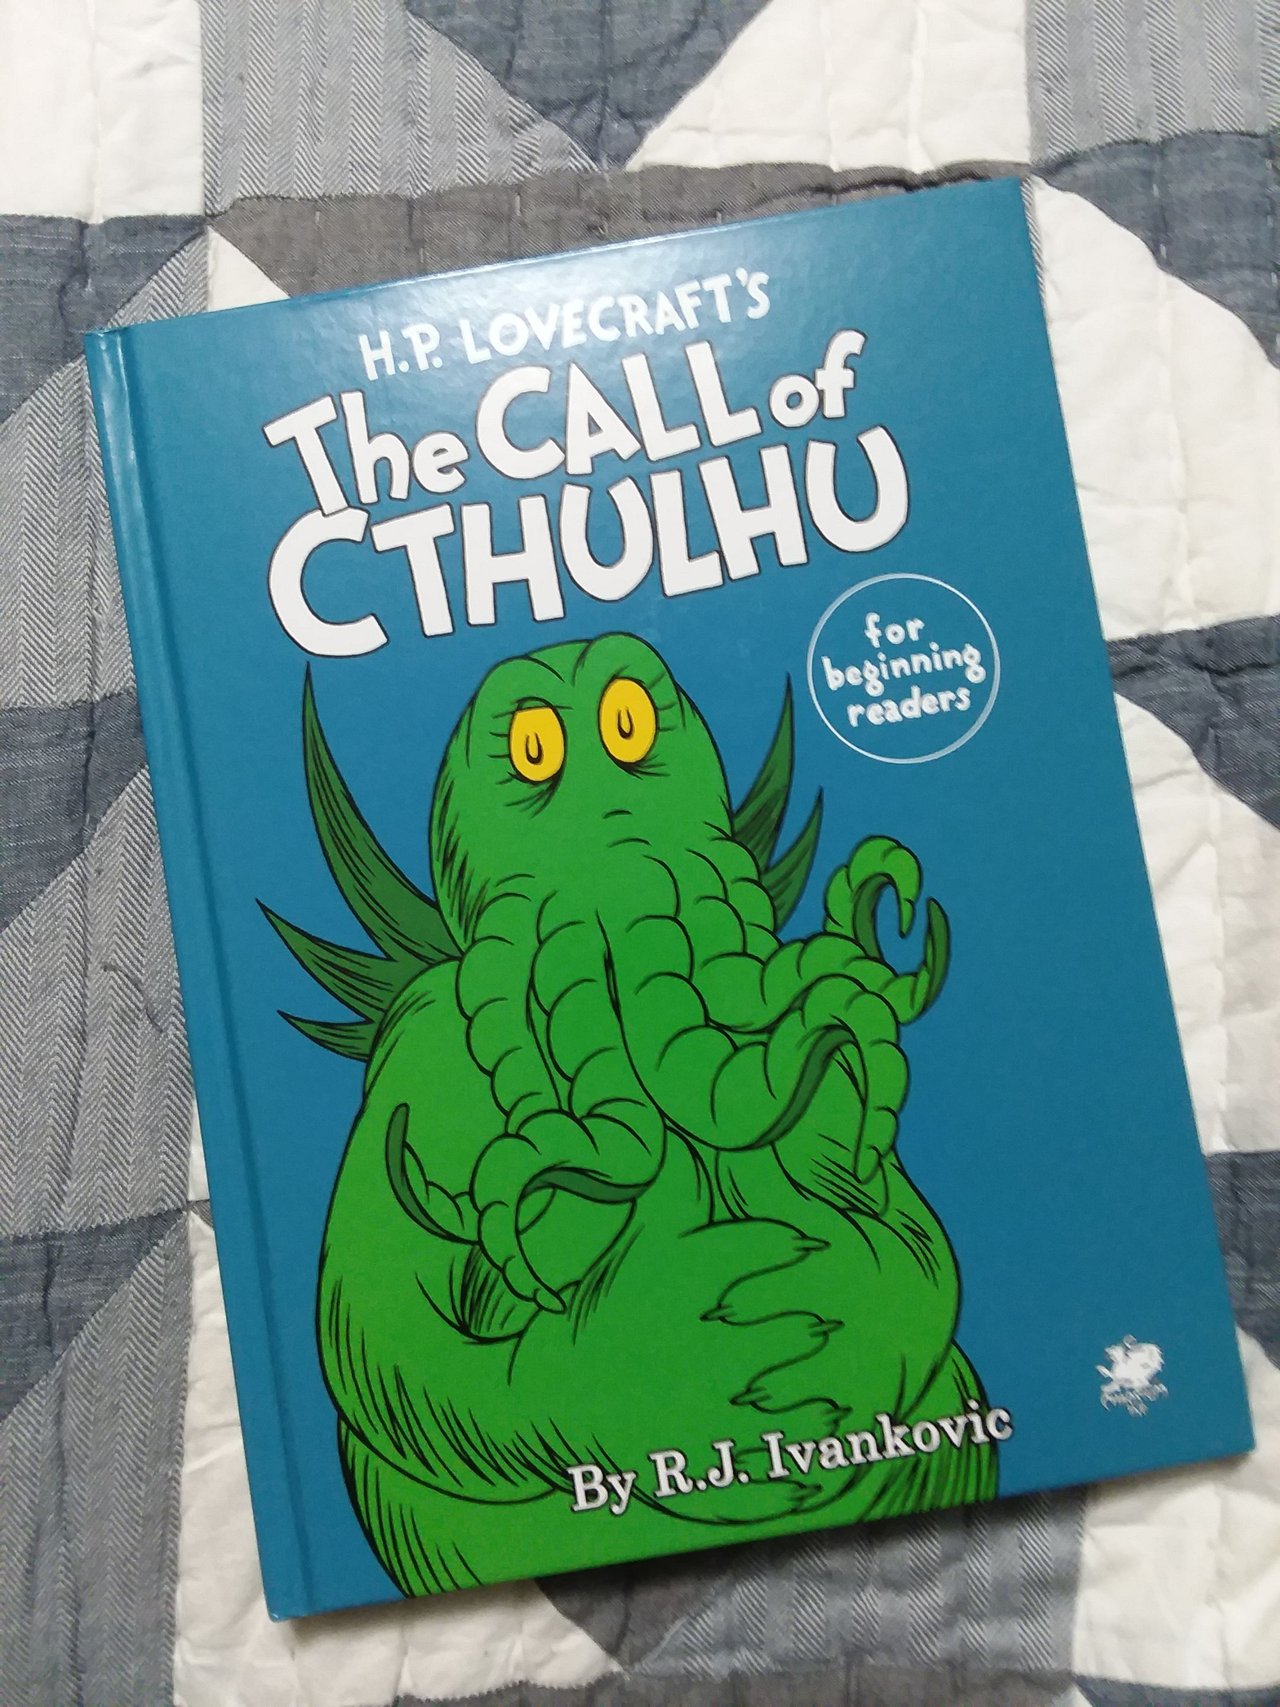 The Call of Cthulhu (for Beginning Readers)